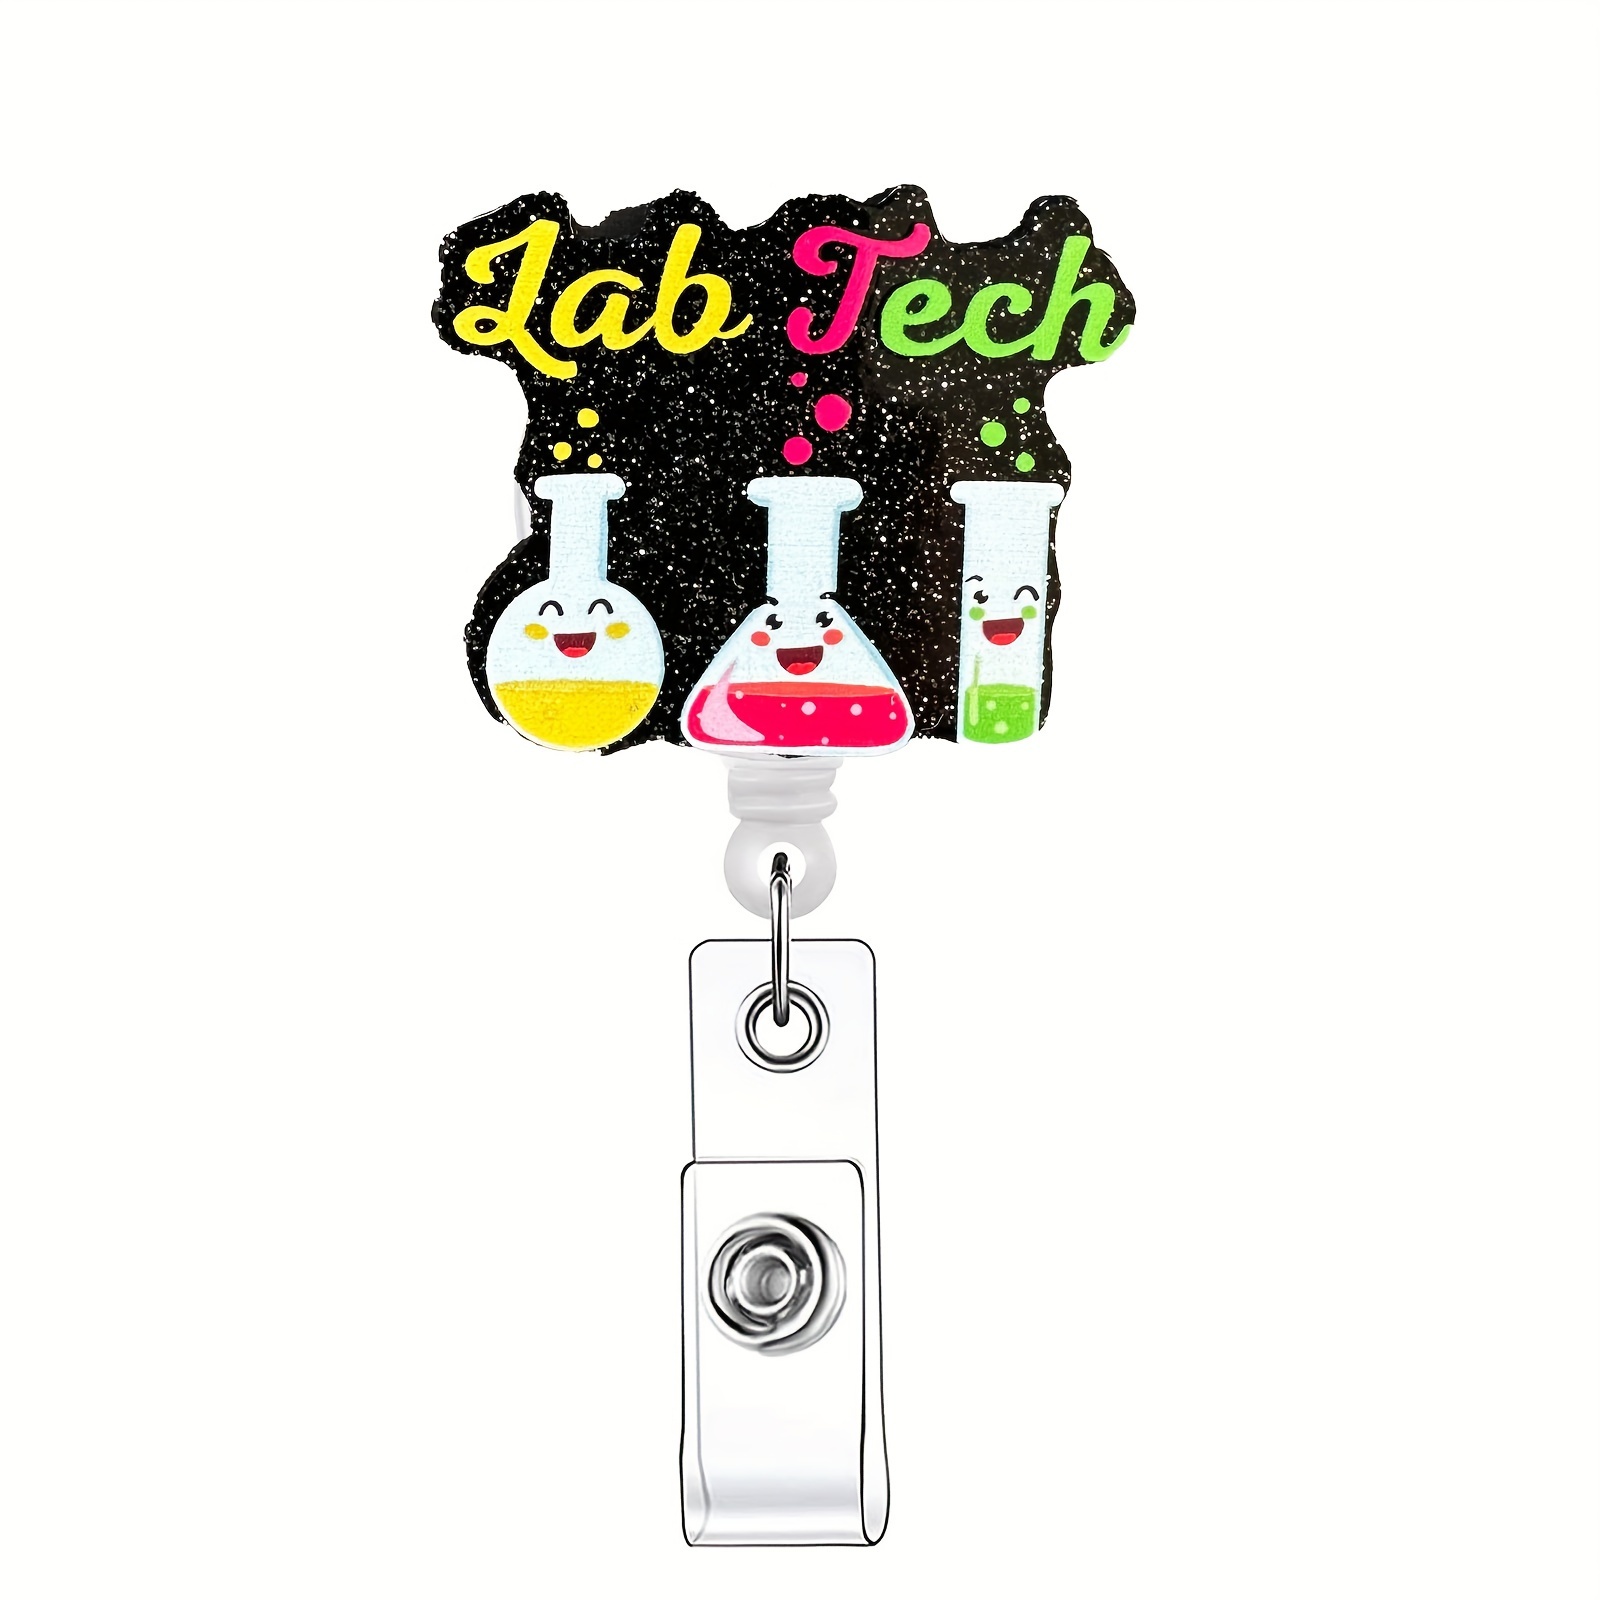 Coffee is My Blood Type Badge Reels Retractable with ID Clip Bling